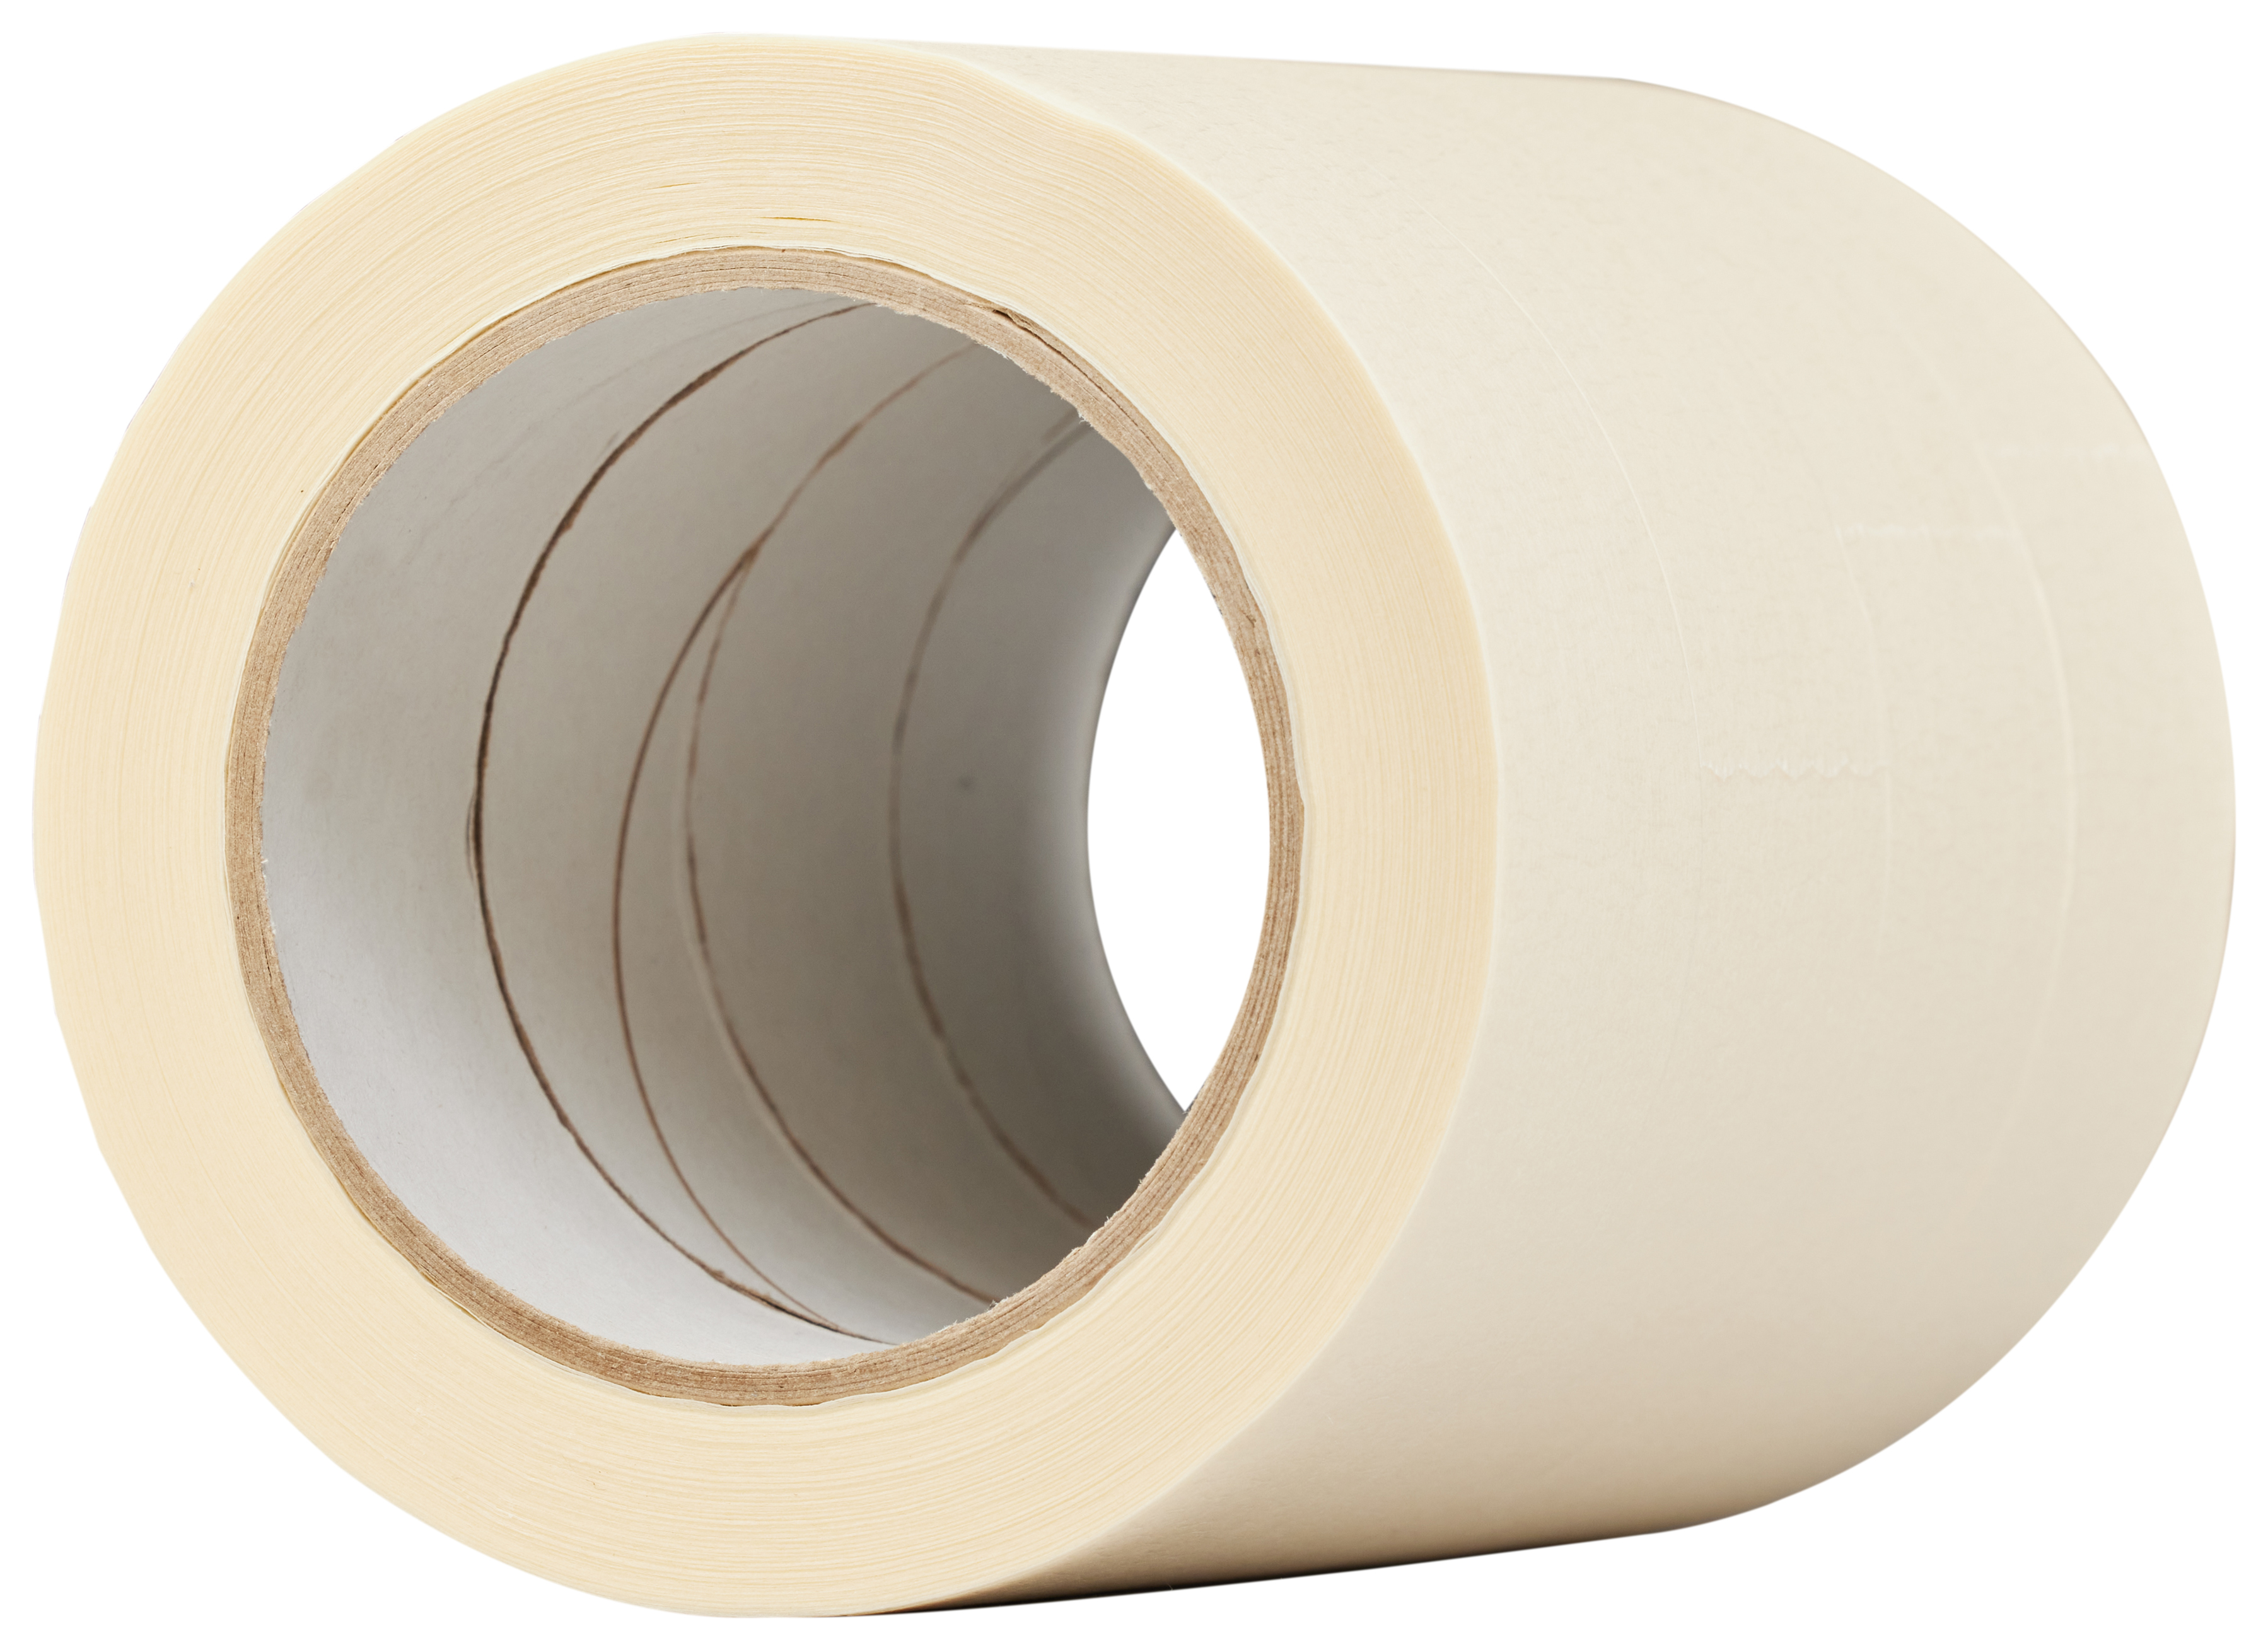 Wickes Multi-Surface Cream Masking Tape - 48mm x 50m - Pack of 4